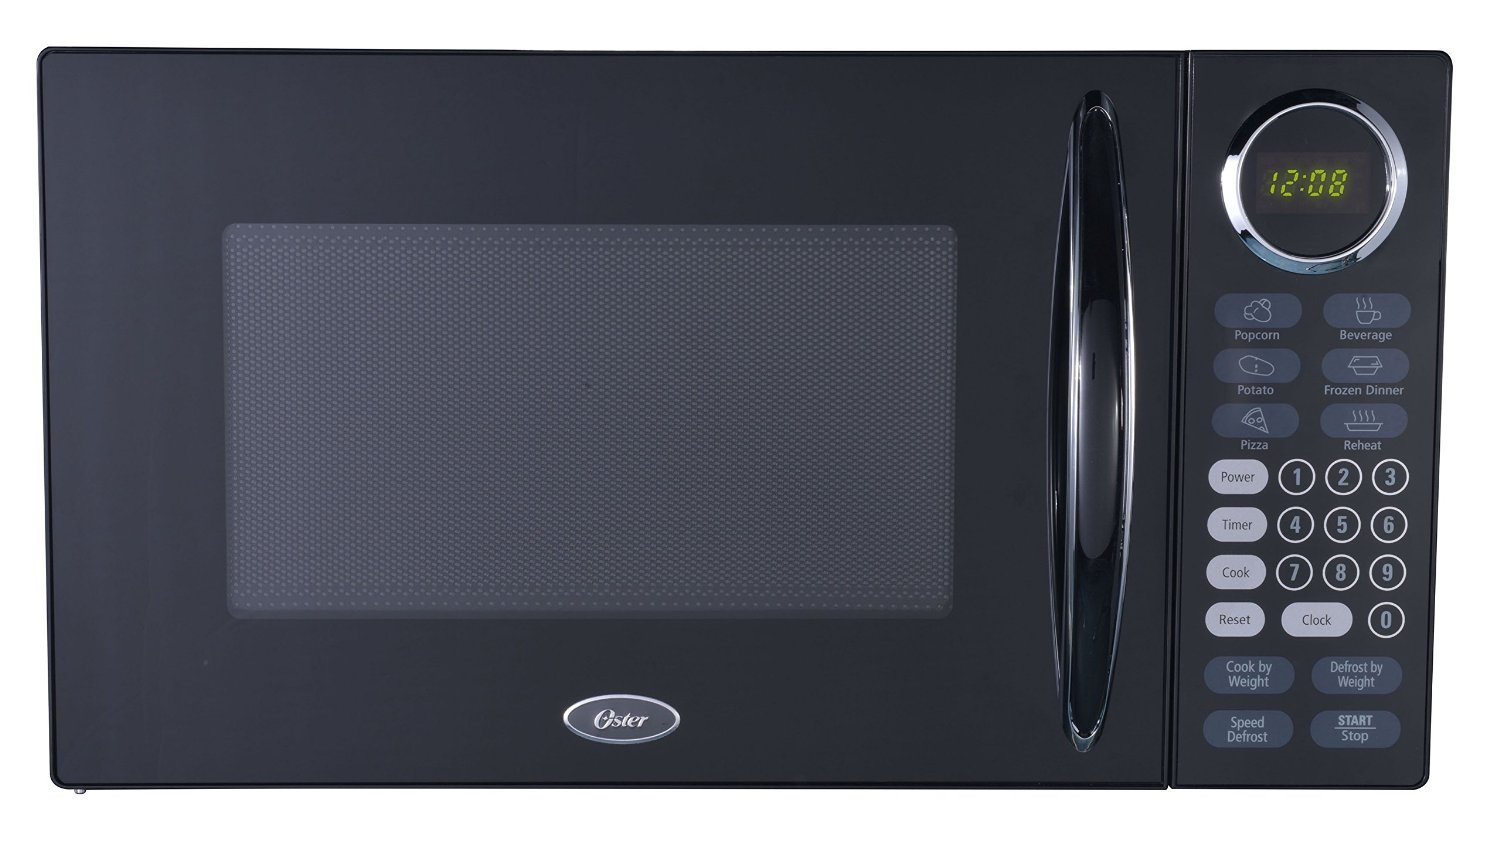 Oster OGB8902 0.9-Cubic Feet Microwave Oven, Black